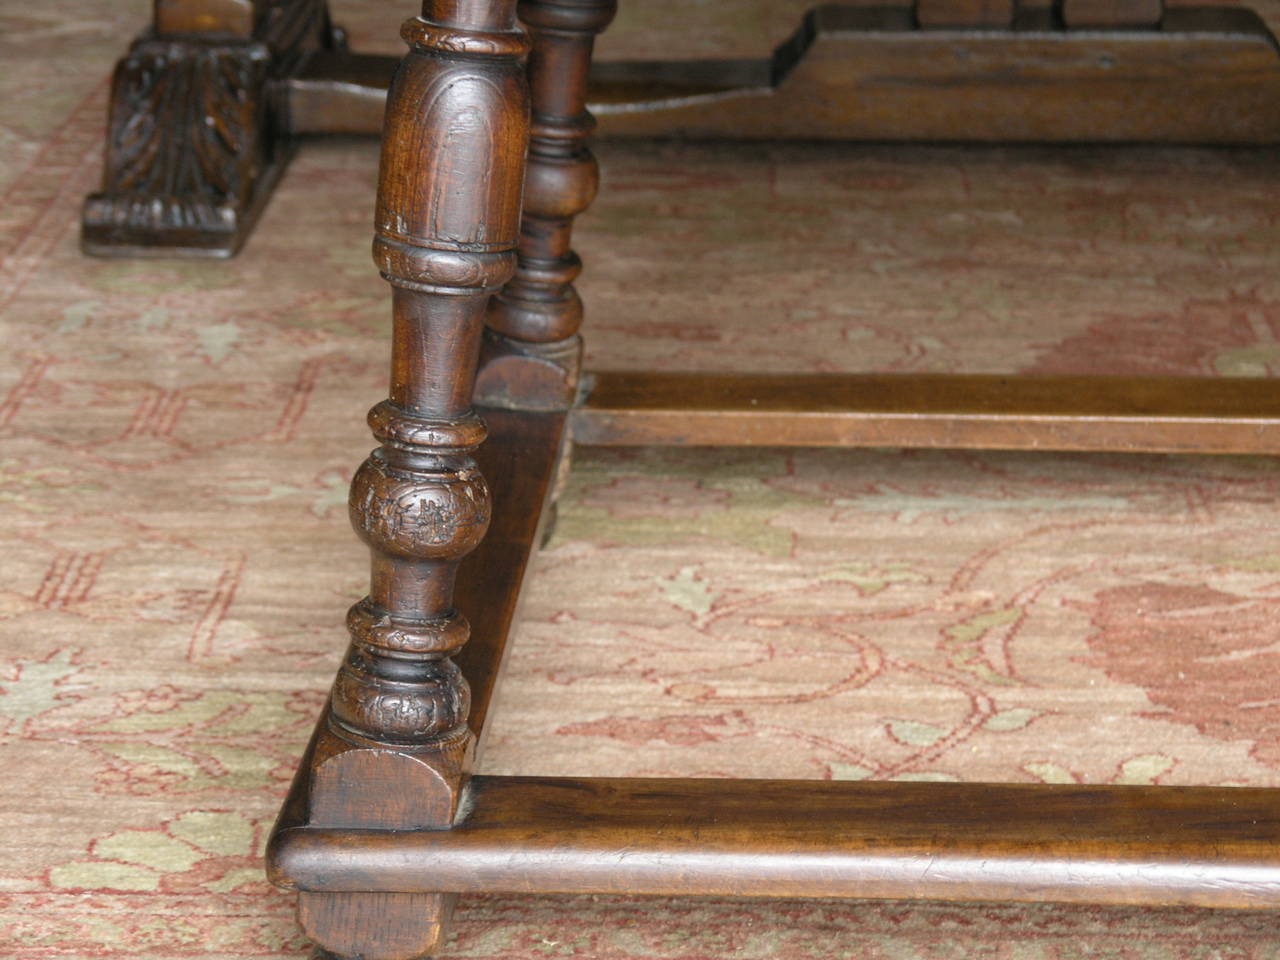 Rectangular top with molded edge above a drawer raised baluster splayed legs joined by stretchers and ending in bun feet